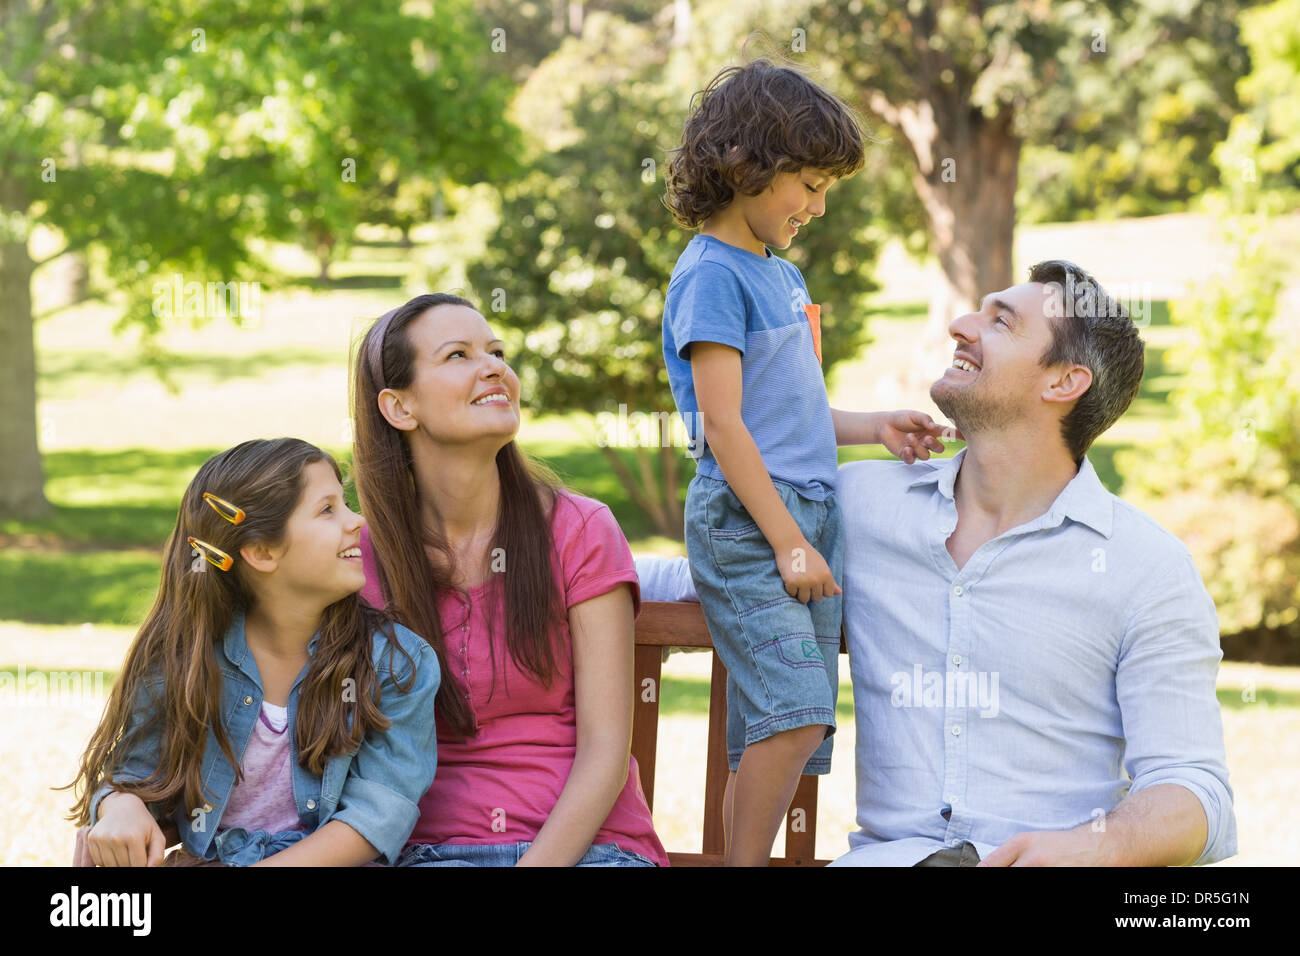 Couple with young kids sitting on park bench Stock Photo